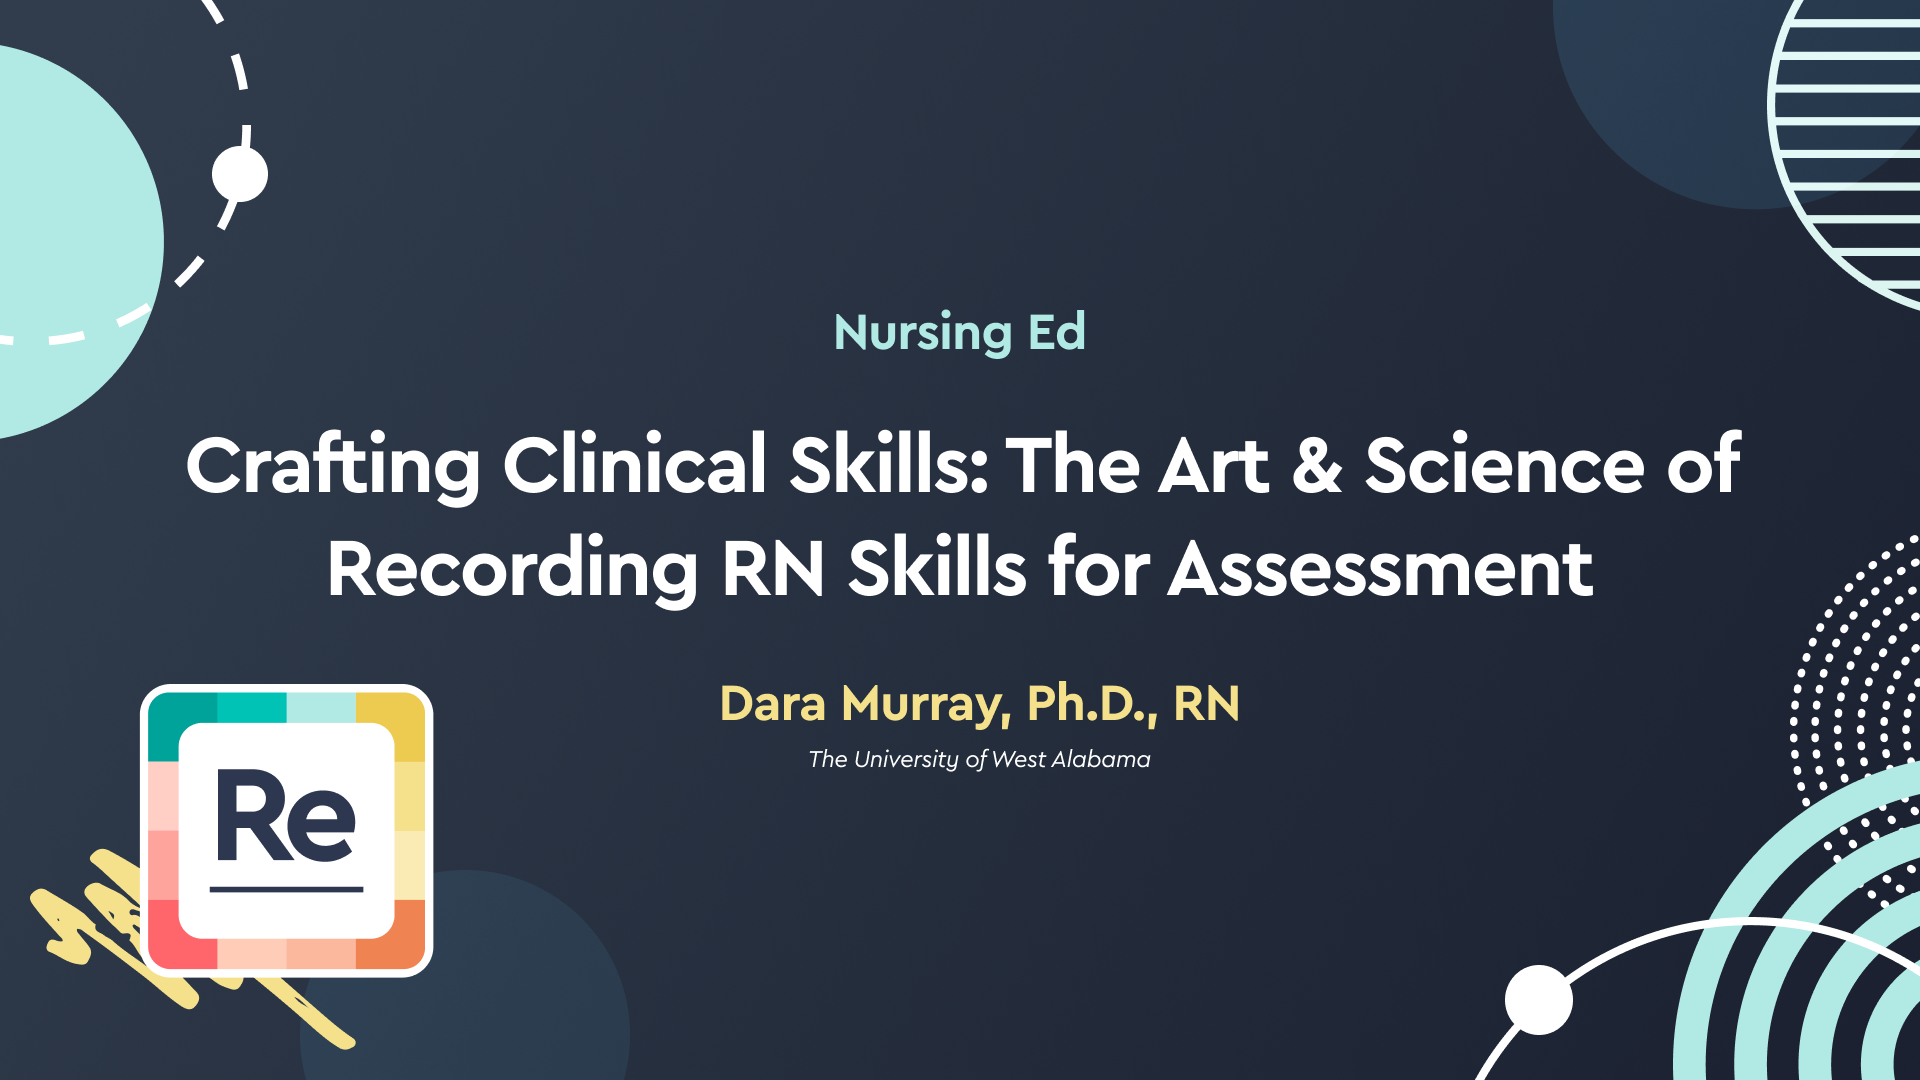 Crafting Clinical Skills: The Art & Science of Recording RN Skills for Assessment